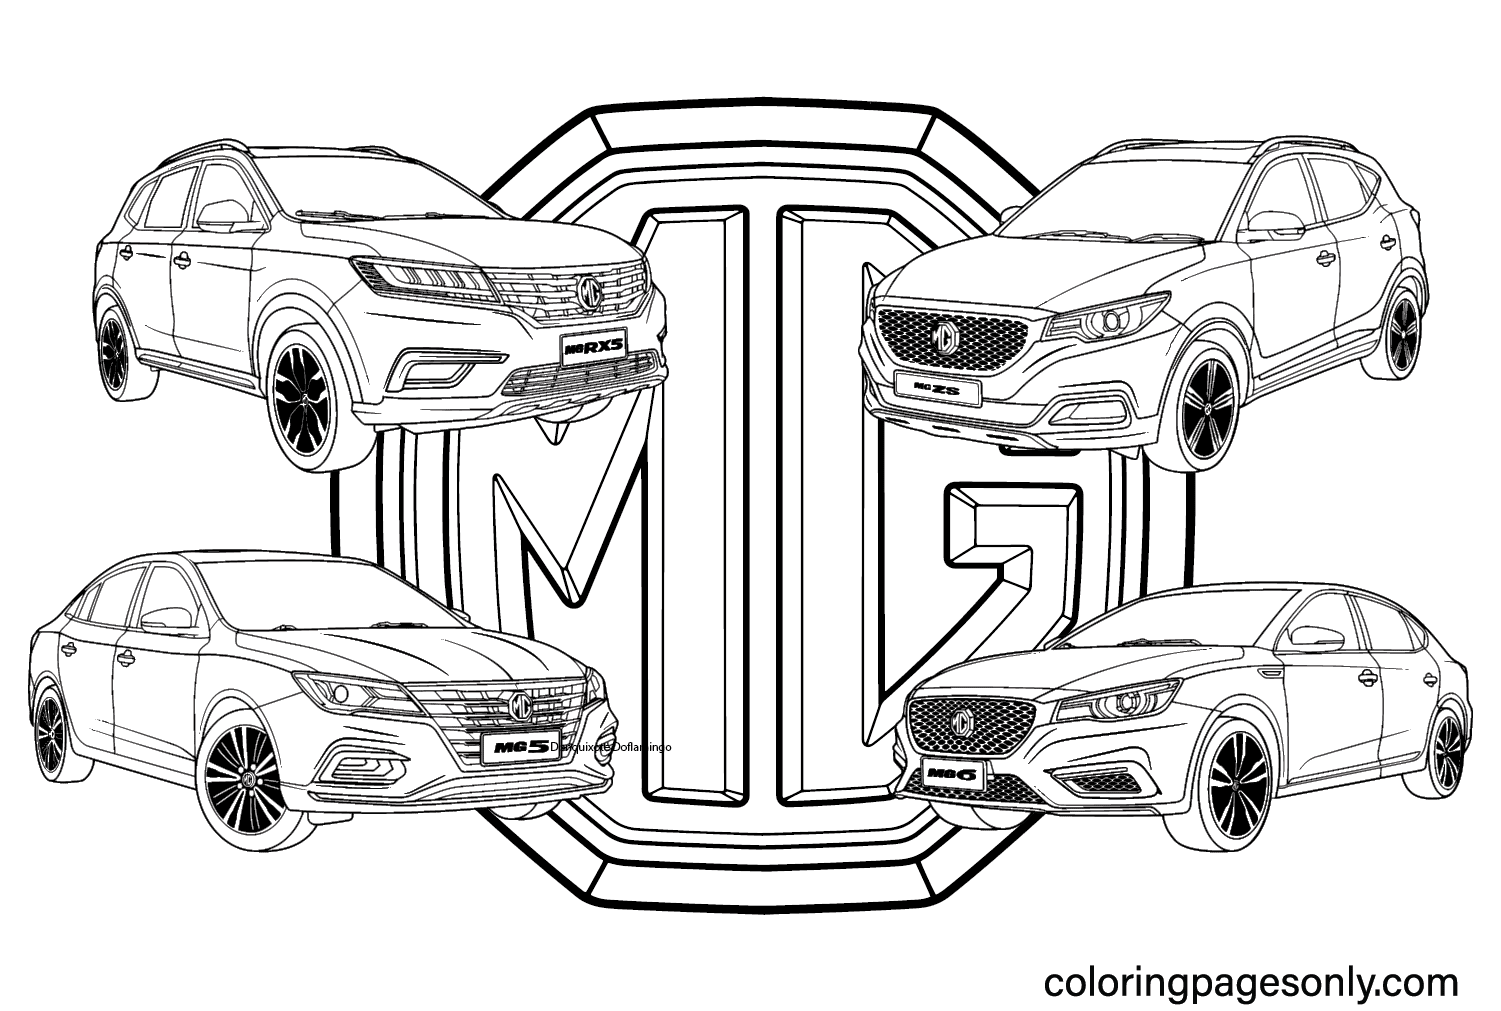 MG Car Coloring Page from MG